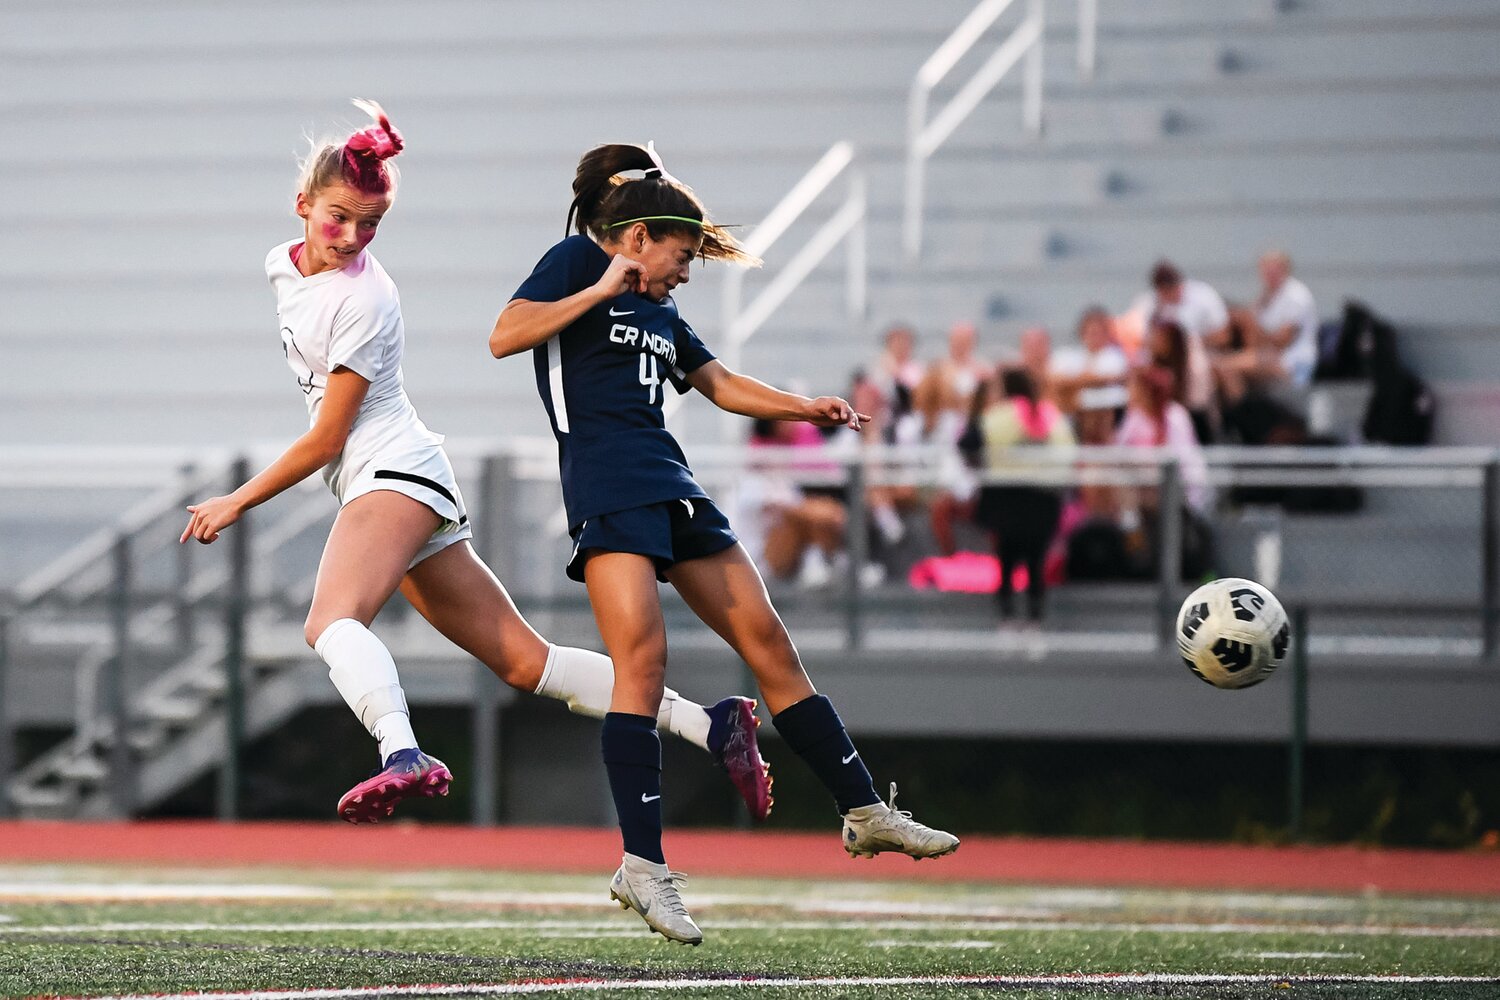 Council Rock South’s Lily Bross directs a shot on goal past Council Rock North’s Isabel Diaz during the first half.